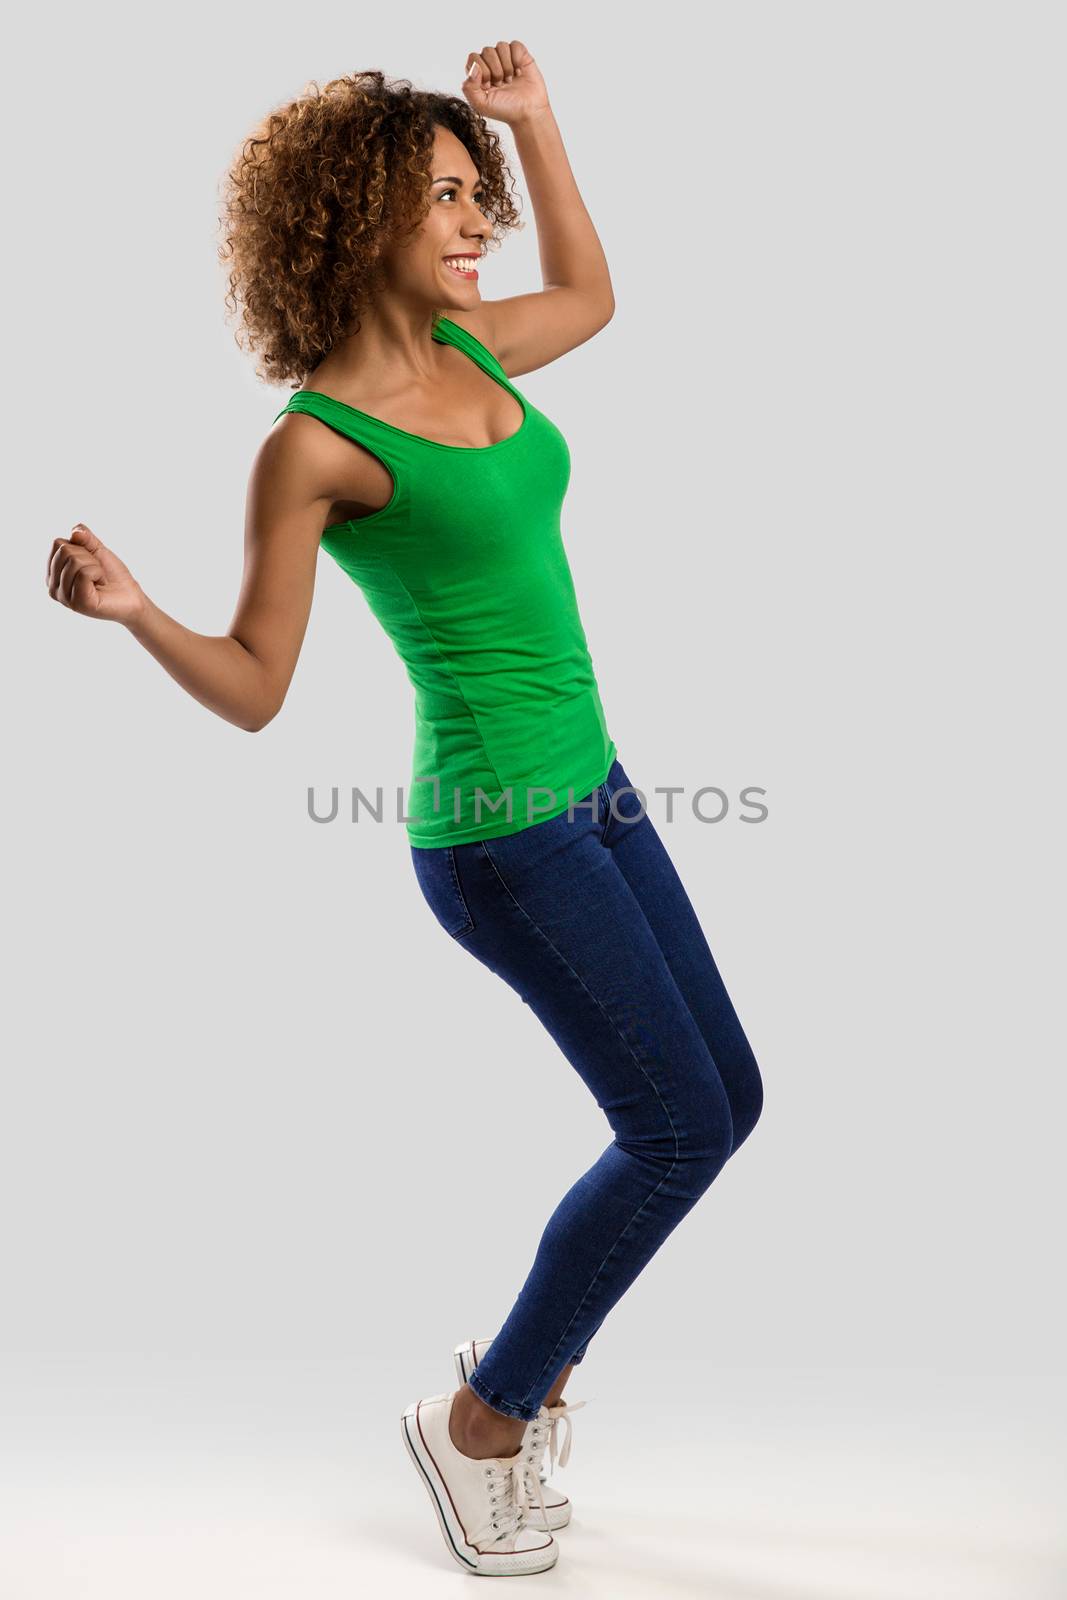 Beautiful and happy African American woman with arms raiaed